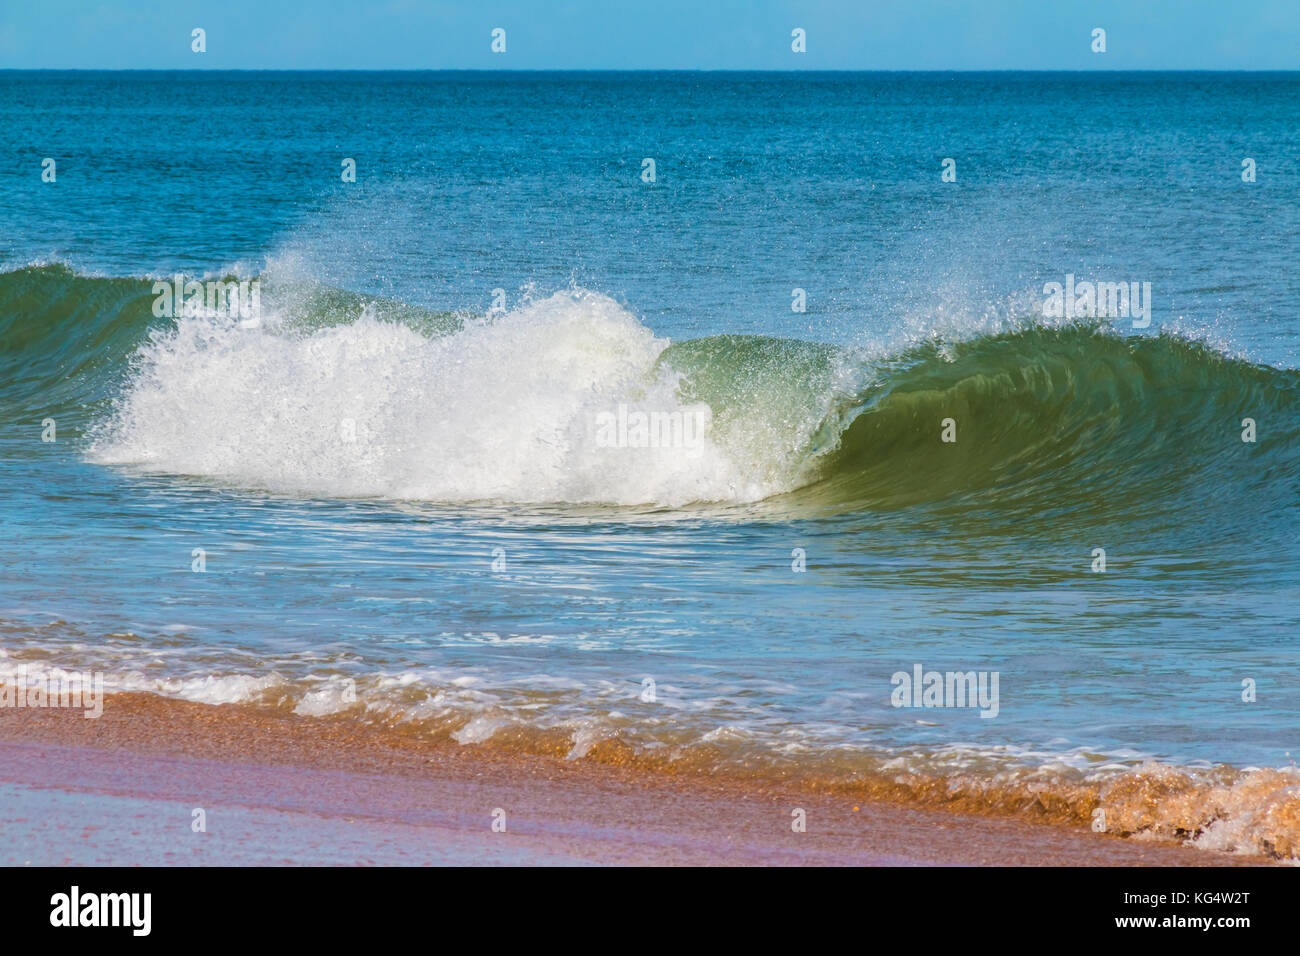 The surf on the sand shore and waves in the ocean in sunny hot day Stock Photo